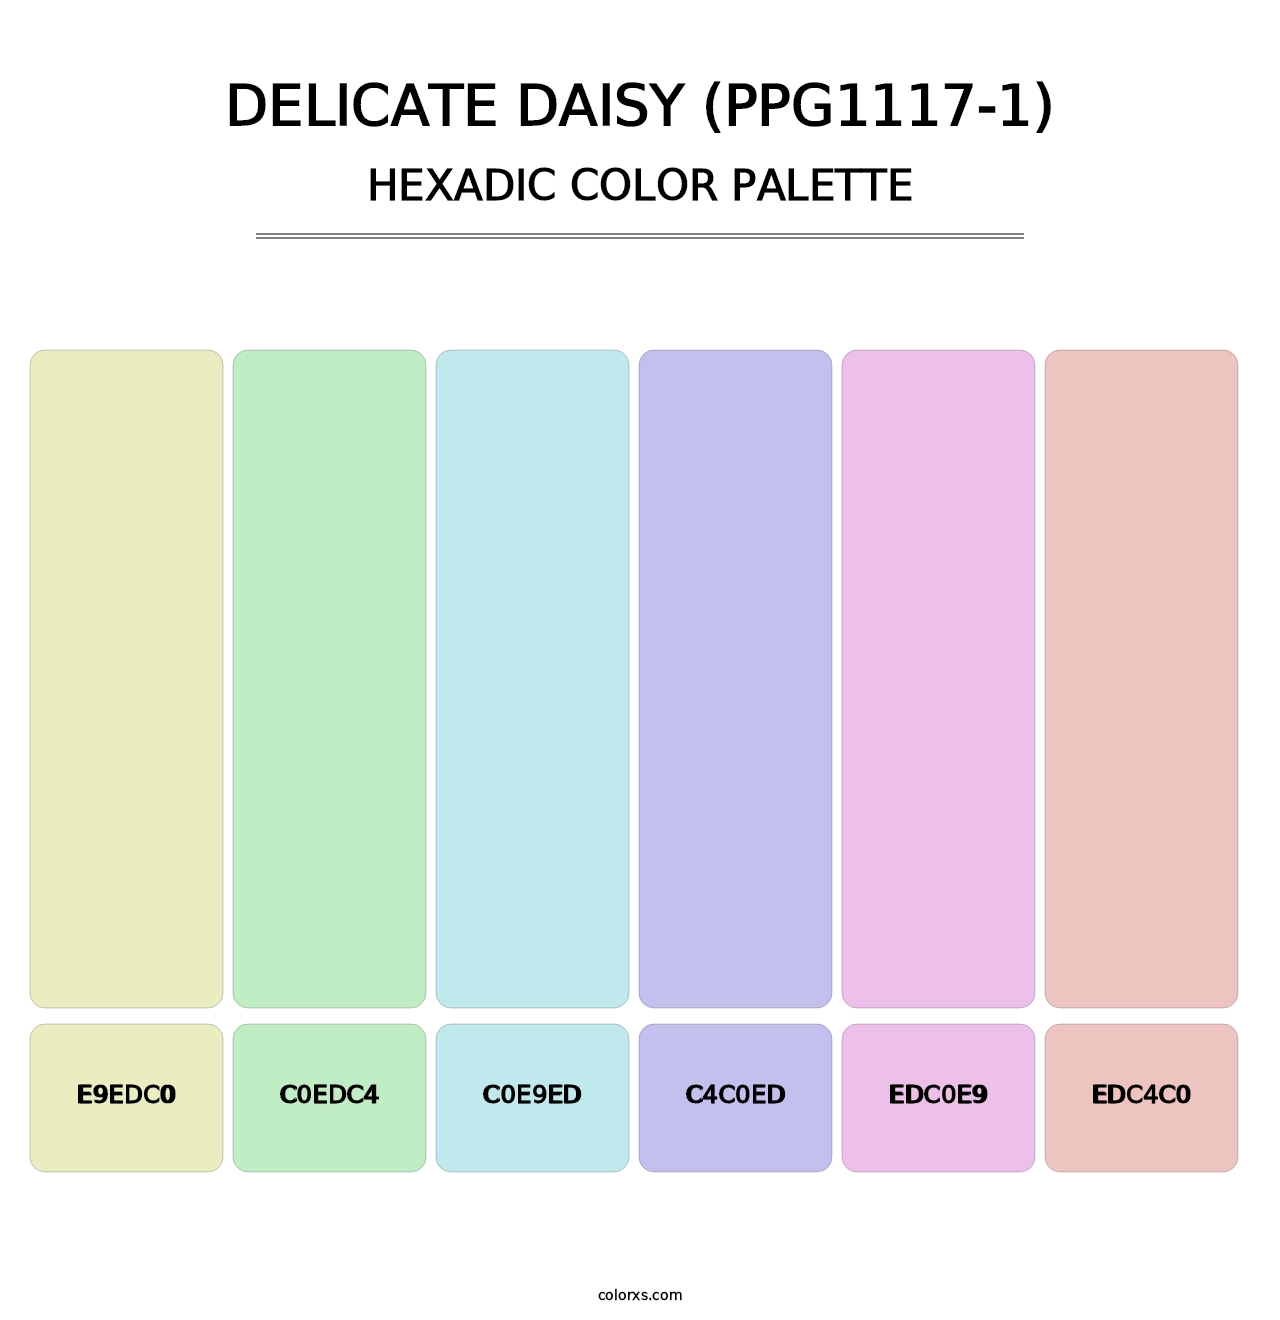 Delicate Daisy (PPG1117-1) - Hexadic Color Palette